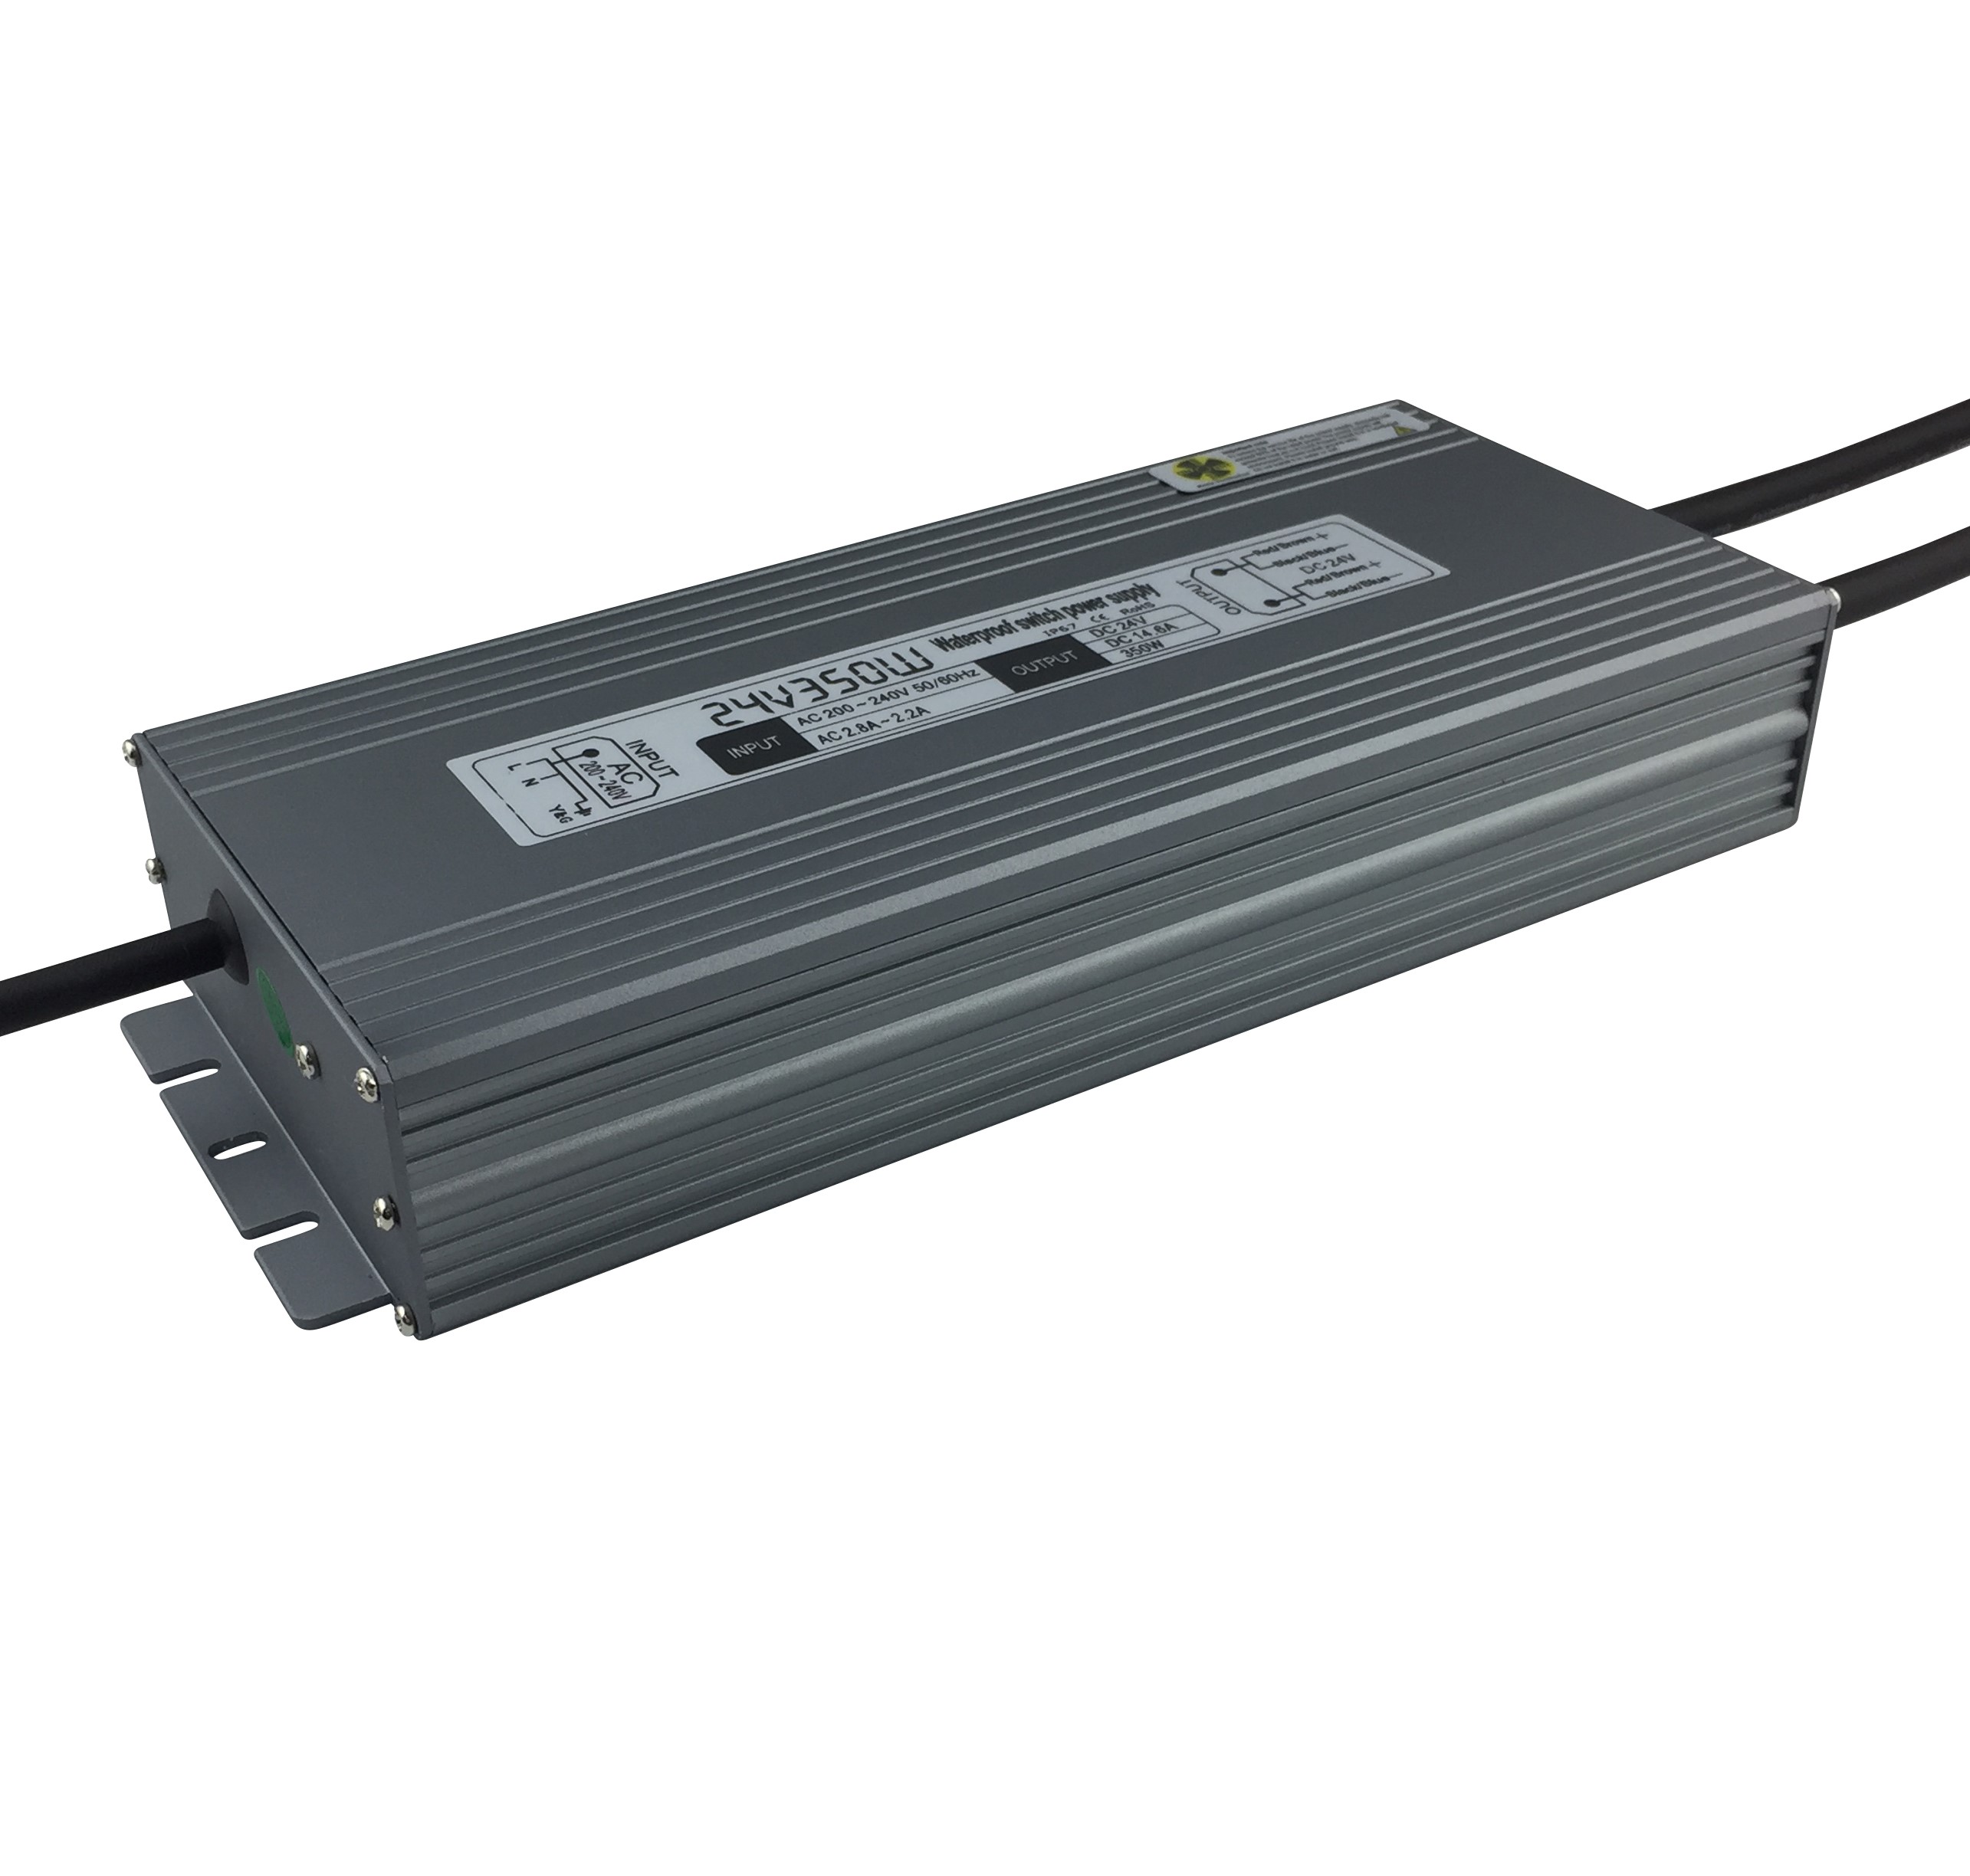 Newly Arrival 24v 30a Power Supply - Waterproof Led Power Supply 24v 15a 360W Ip67 Led Driver  – Huyssen